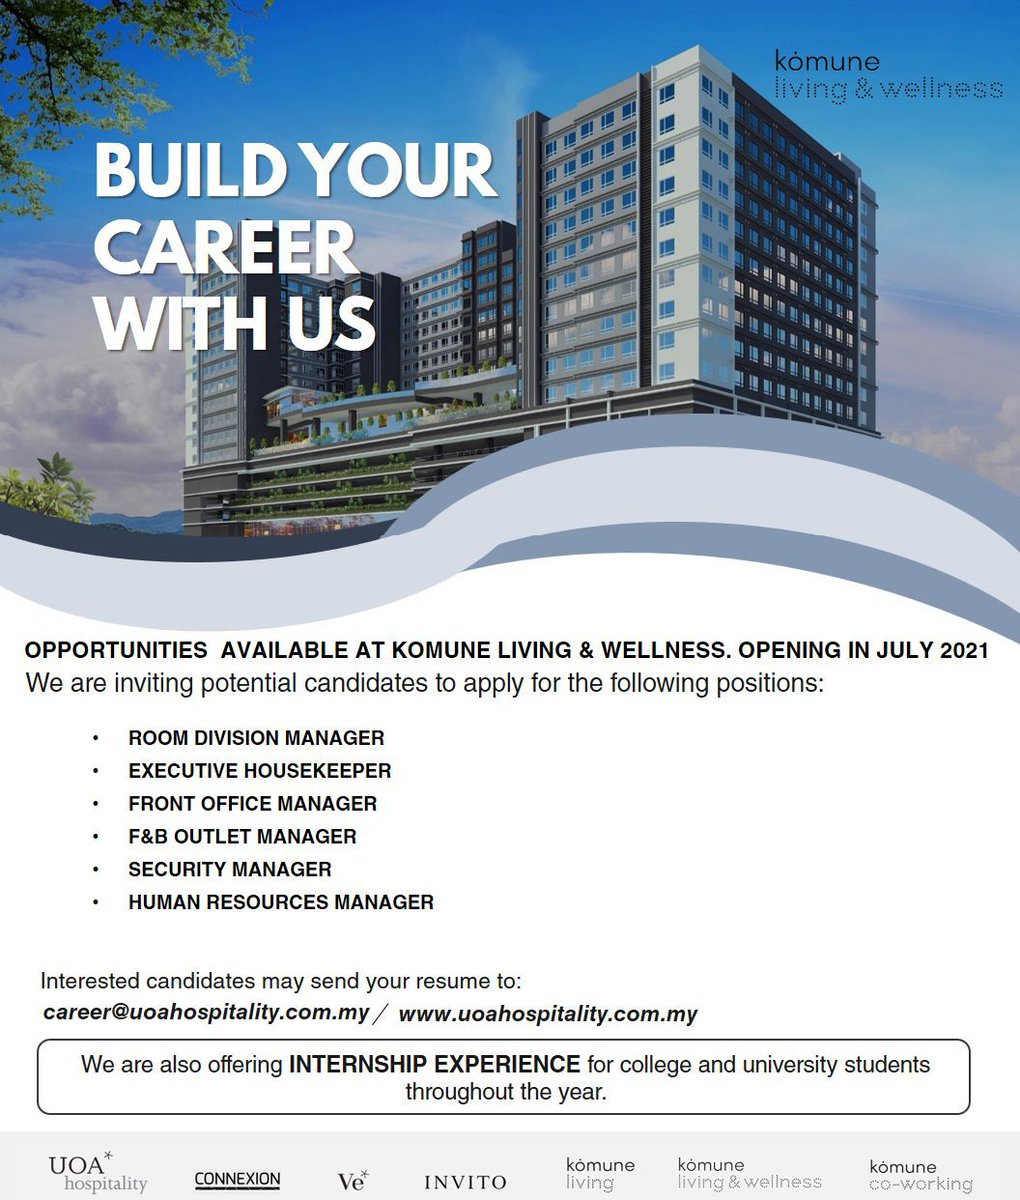 KOMUNE LIVING & WELLNESS OPENING IN JULY 2021. lnkd.in/e3JwZ7f *) ROOM DIVISION MANAGER *) EXECUTIVE HOUSEKEEPER *) FRONT OFFICE MANAGER *) F&B OUTLET MANAGER *) SECURITY MANAGER *) HUMAN RESOURCES MANAGER + offering INTERNSHIP for college and university students